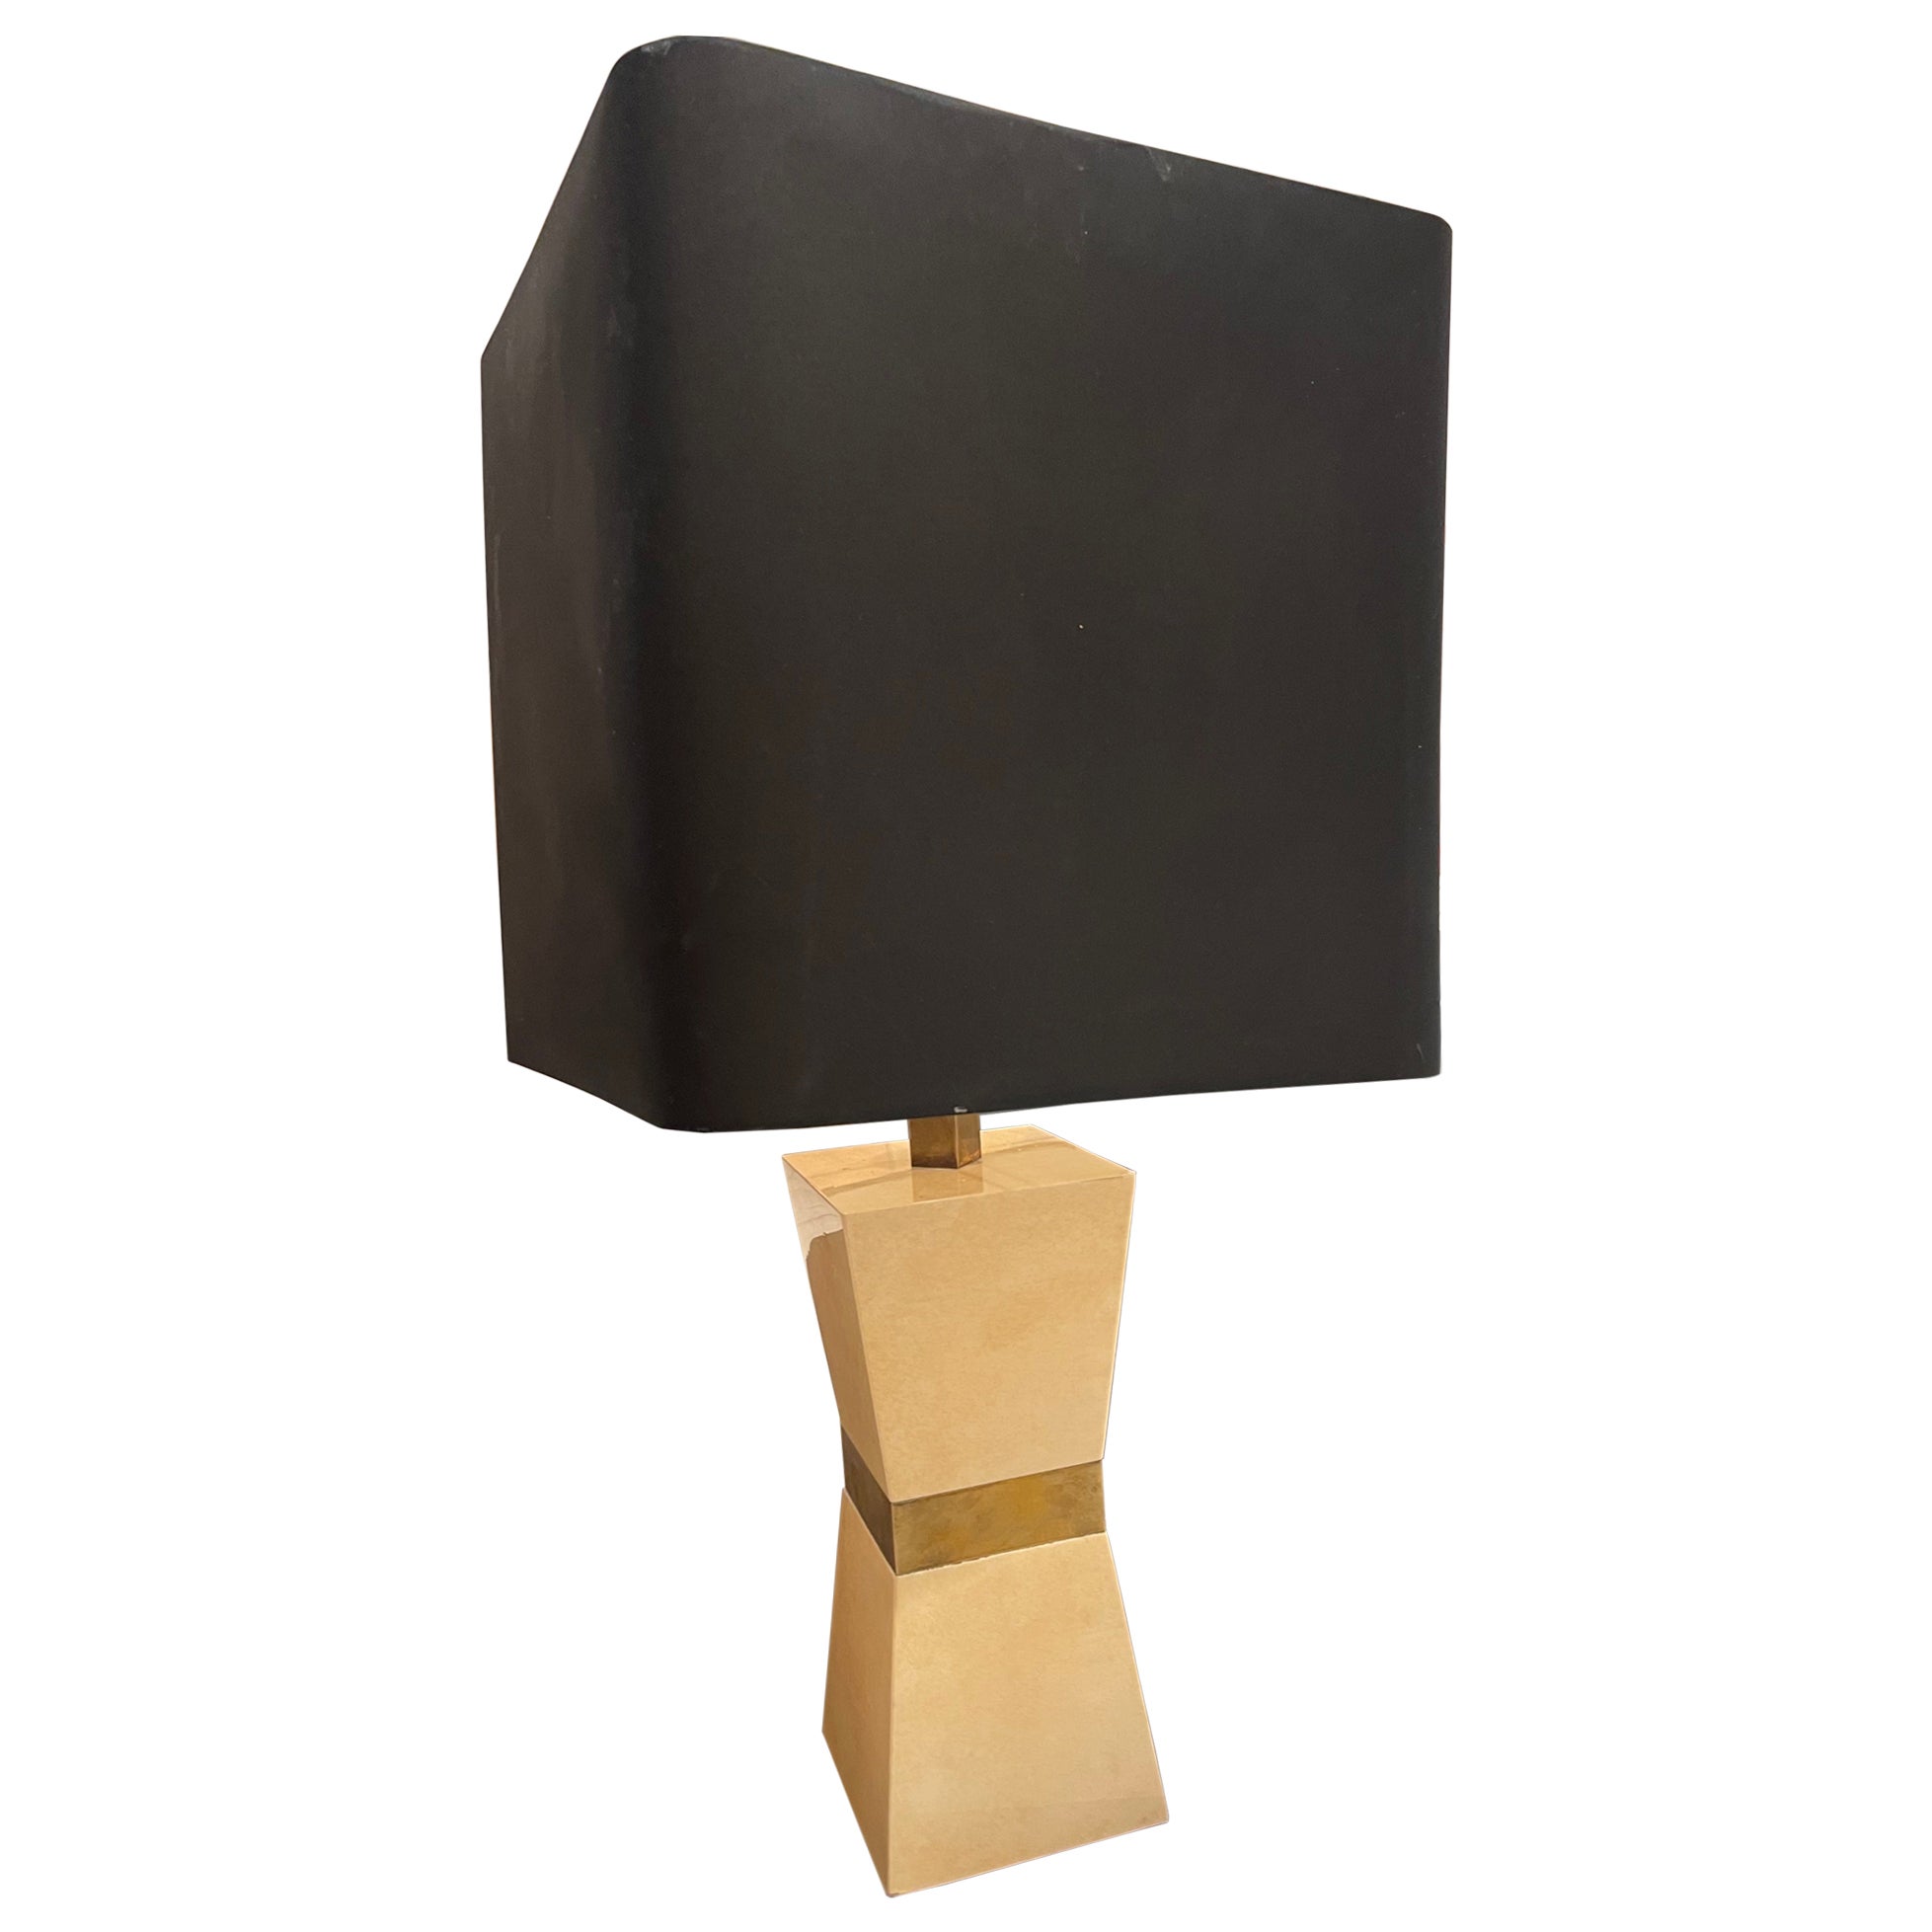 Goatskin Covered Table Lamp Without Pedestal by Aldo Tura, Italy 1970.